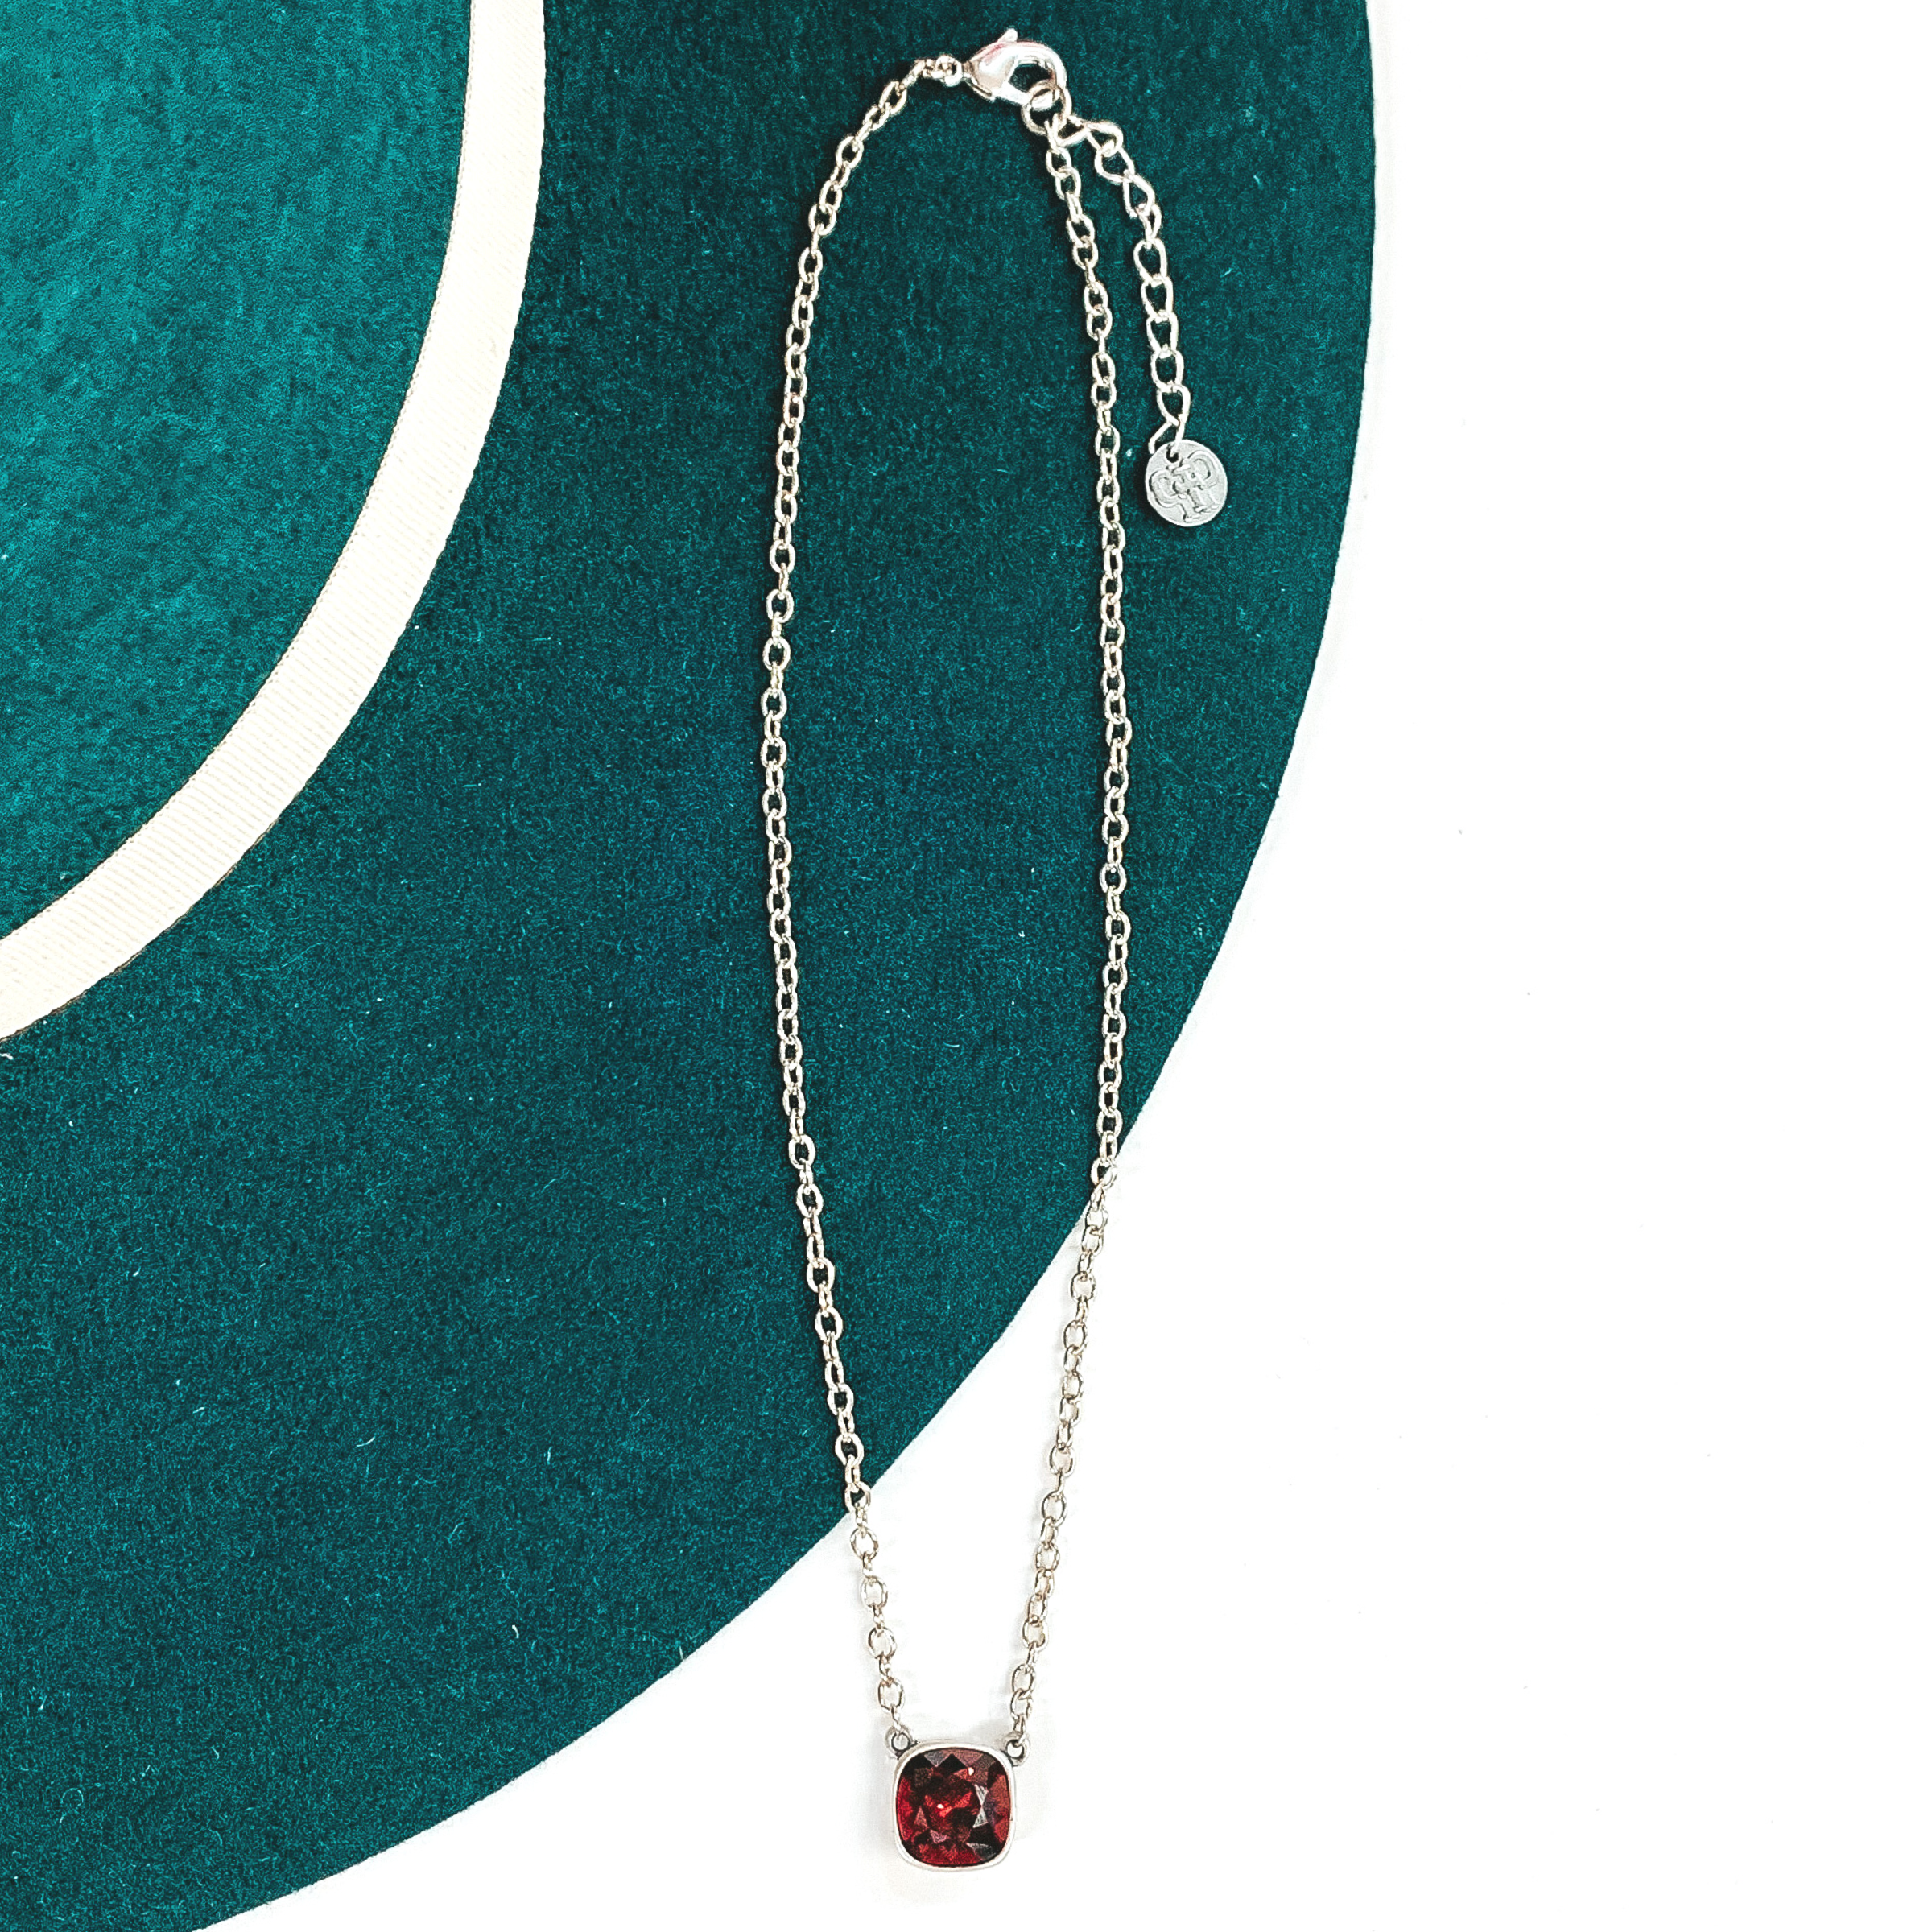 Pink Panache | Silver Chain Necklace with Cushion Cut Crystal in Maroon - Giddy Up Glamour Boutique